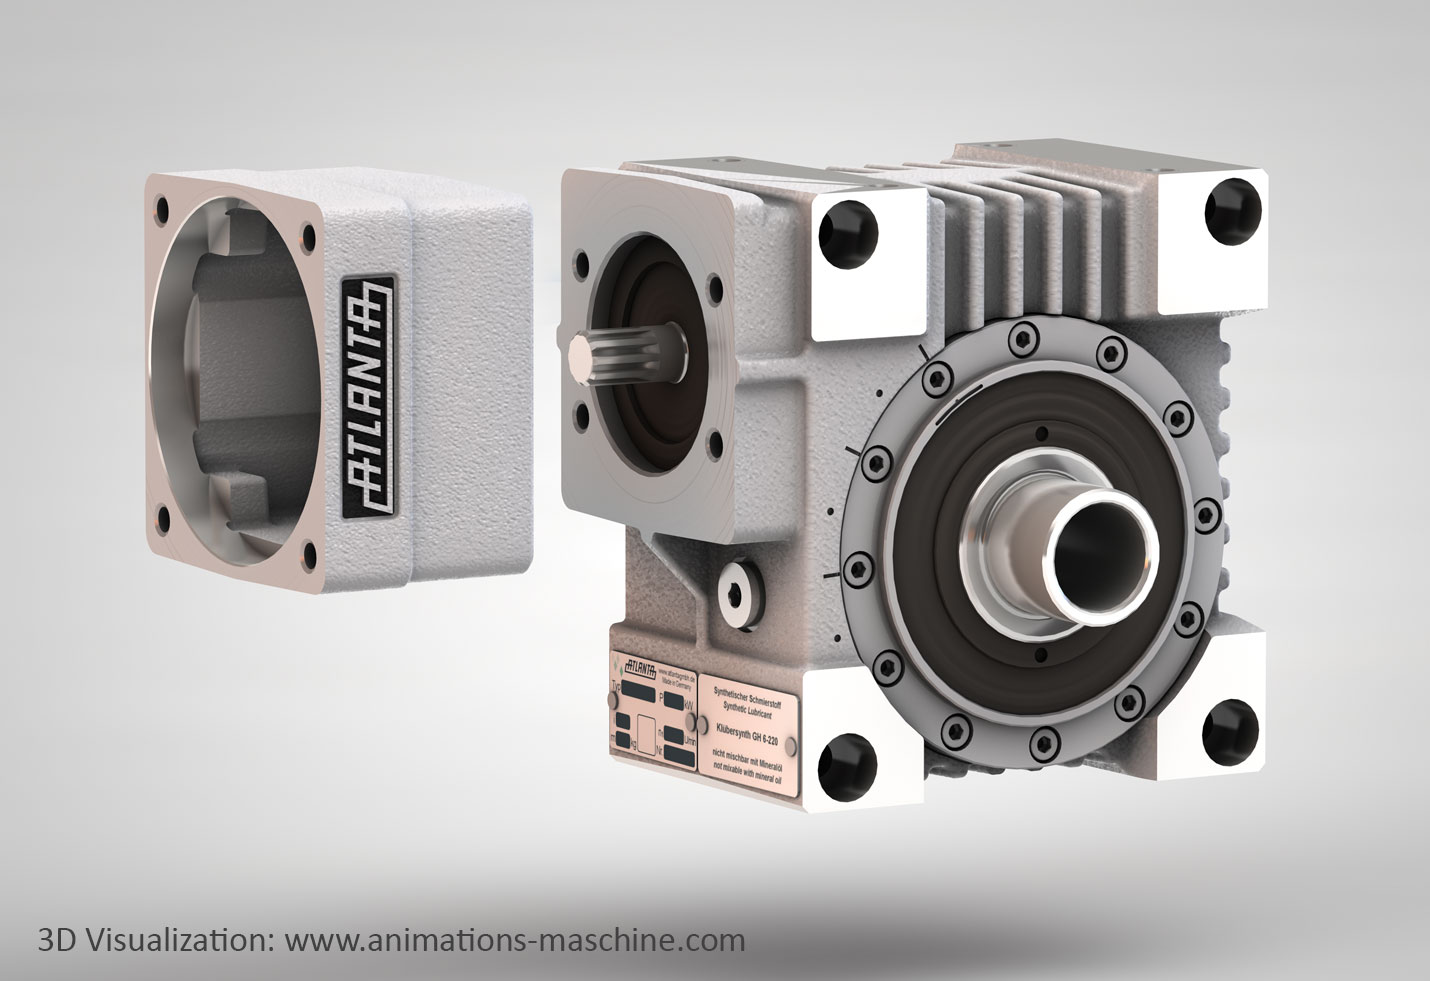 3D product visualization of gears